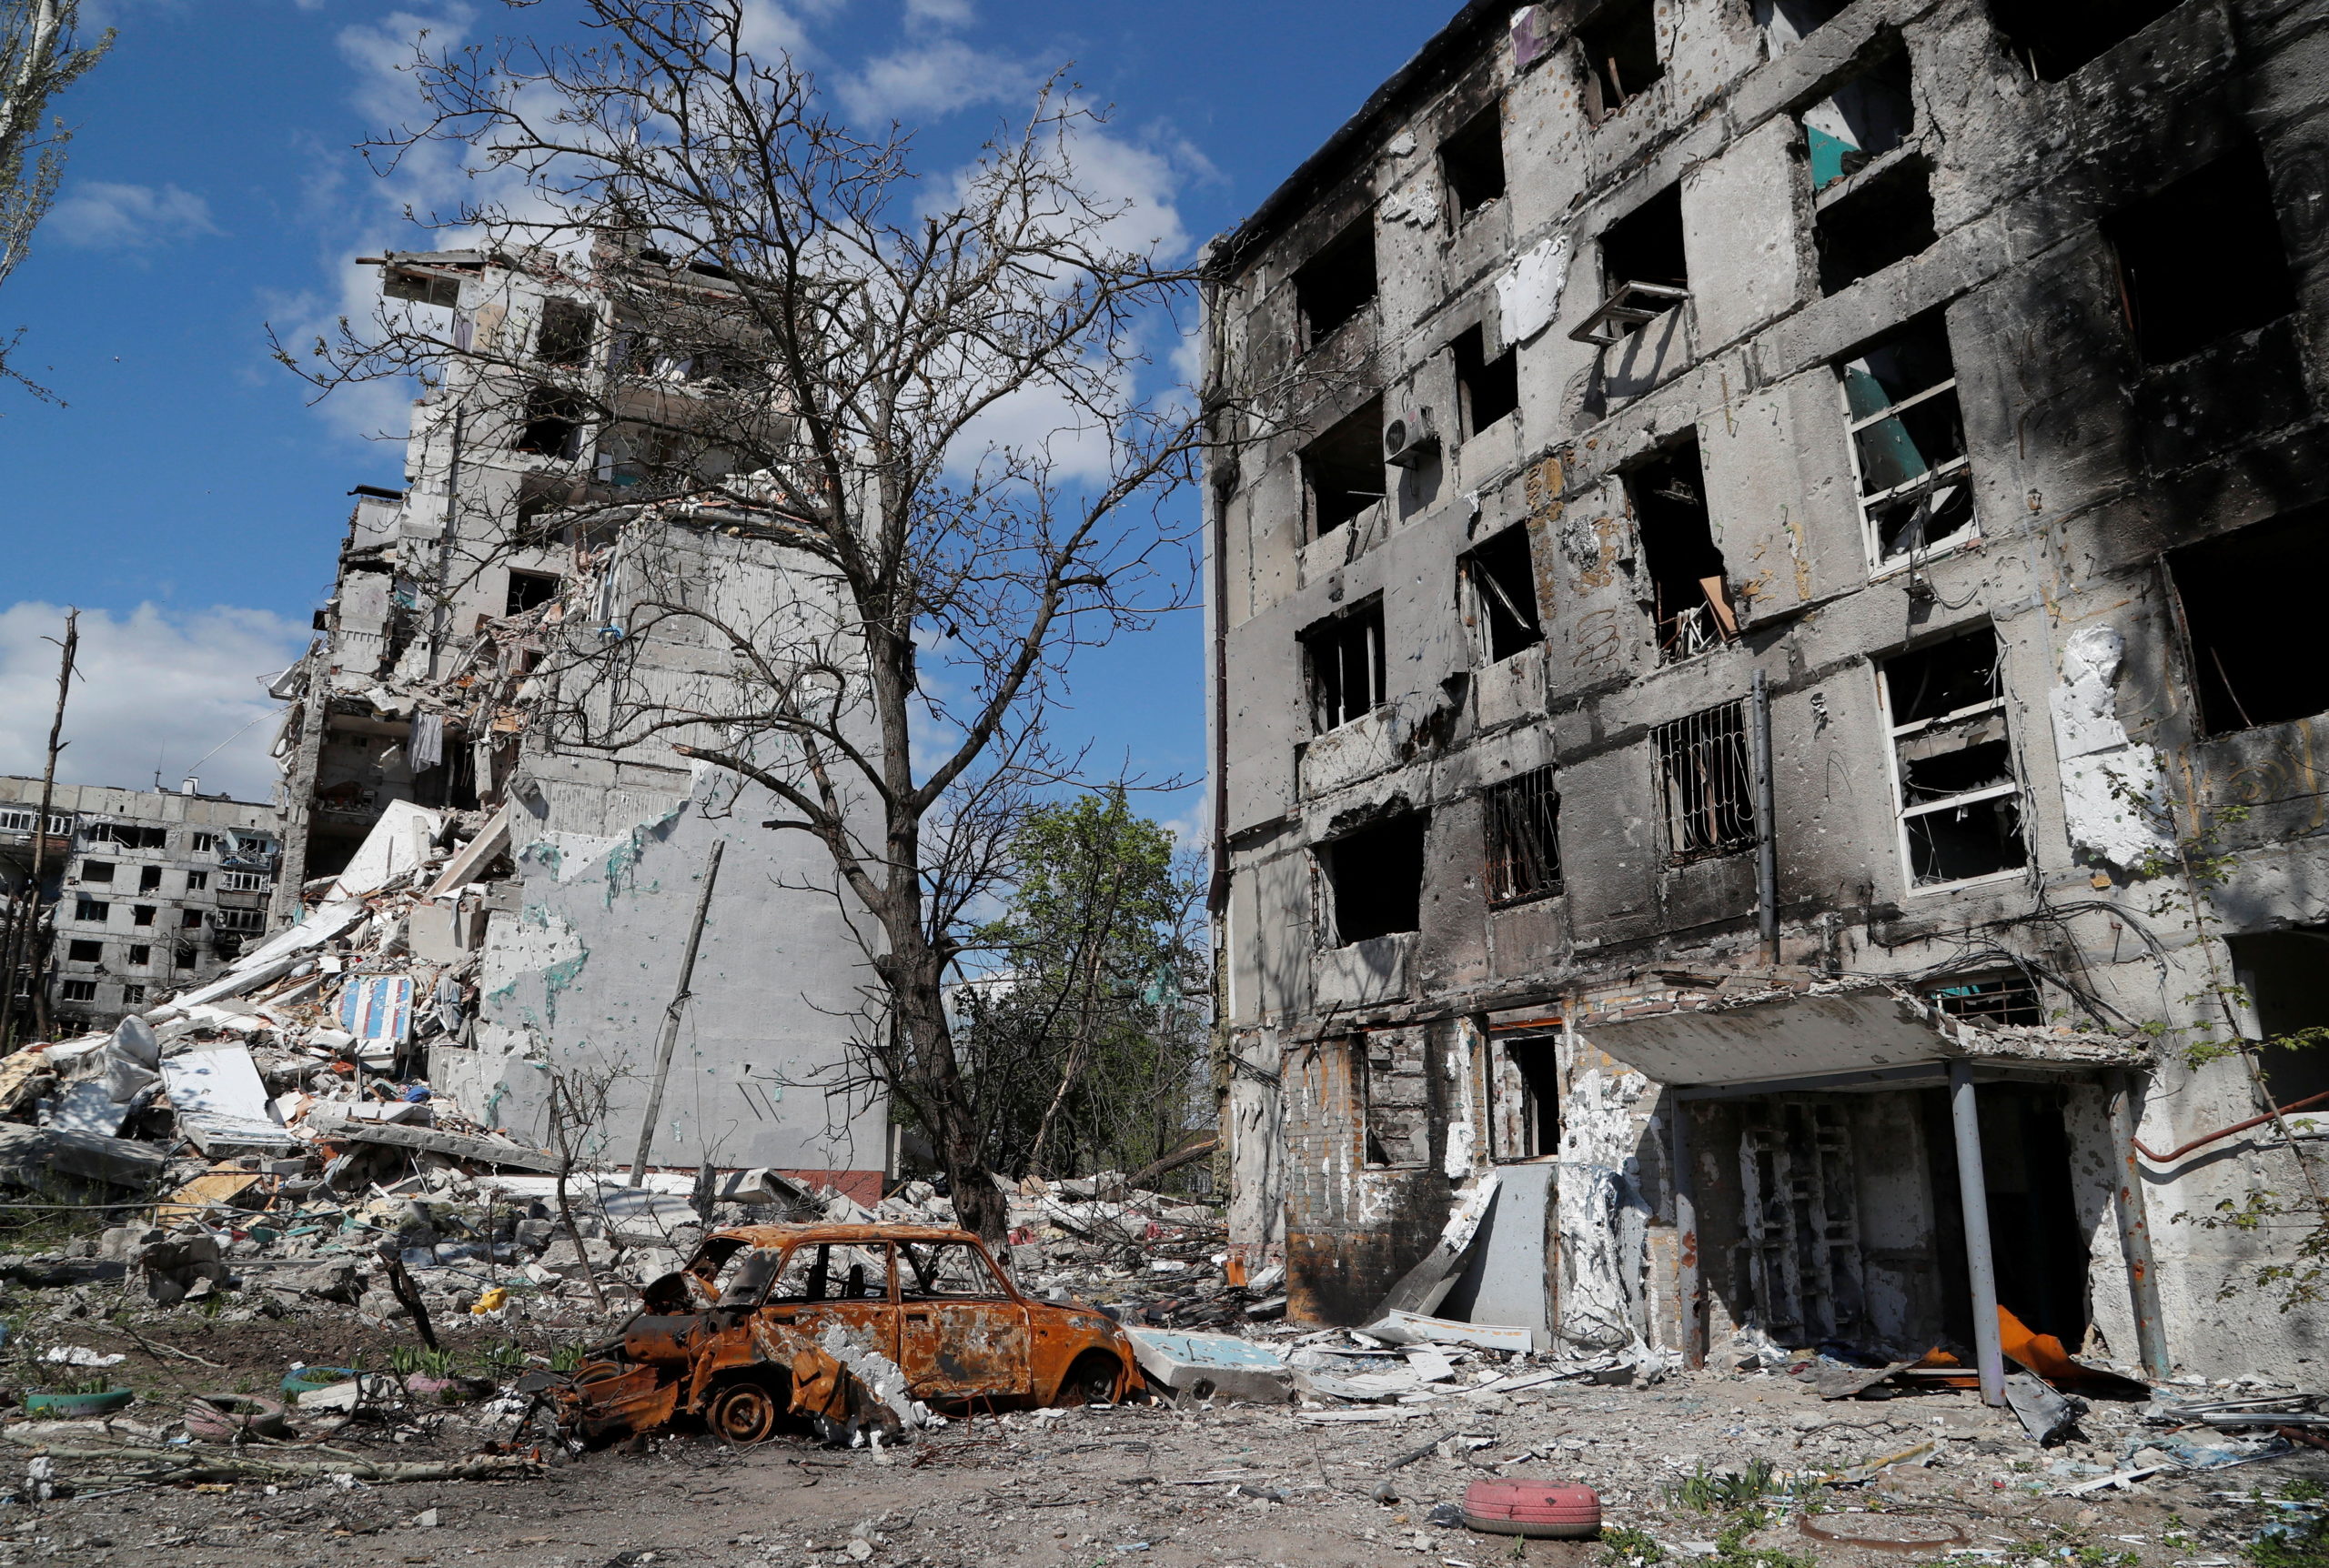 A view shows apartment buildings heavily damaged during Ukraine-Russia conflict in the southern port city of Mariupol, Ukraine April 28, 2022. Picture taken April 28, 2022. REUTERS/Alexander Ermochenko Peace talks